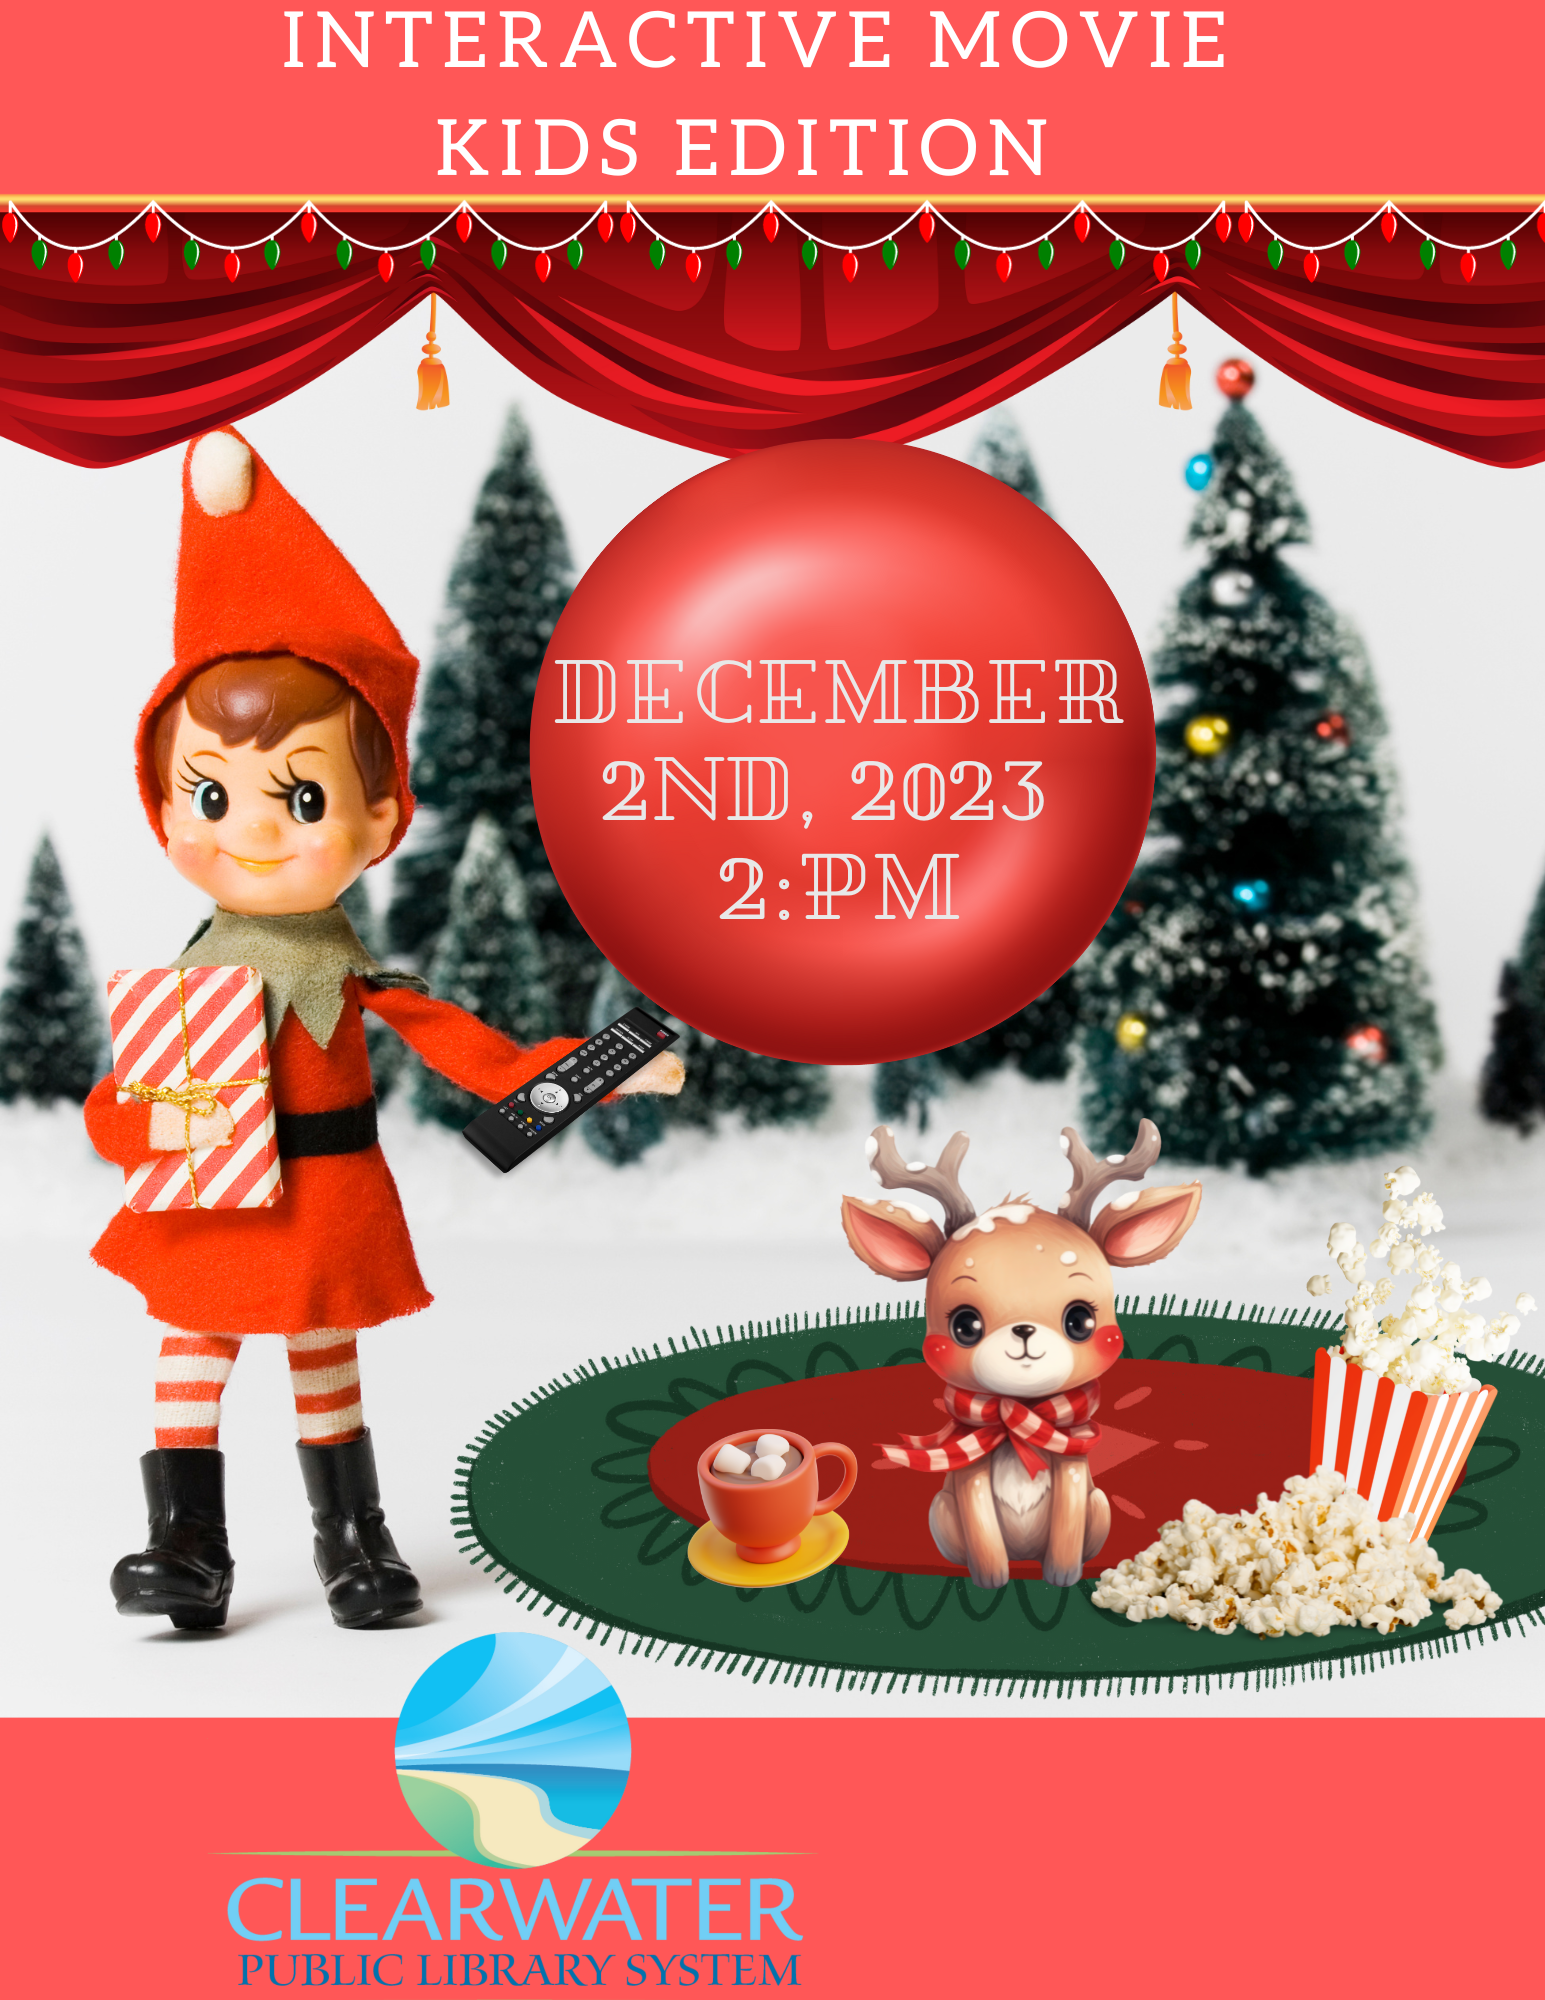 Elf with Remote, Reindeer with hot cocoa and popcorn, Interactive Movie Kids Edition December 2nd 2:00 pm